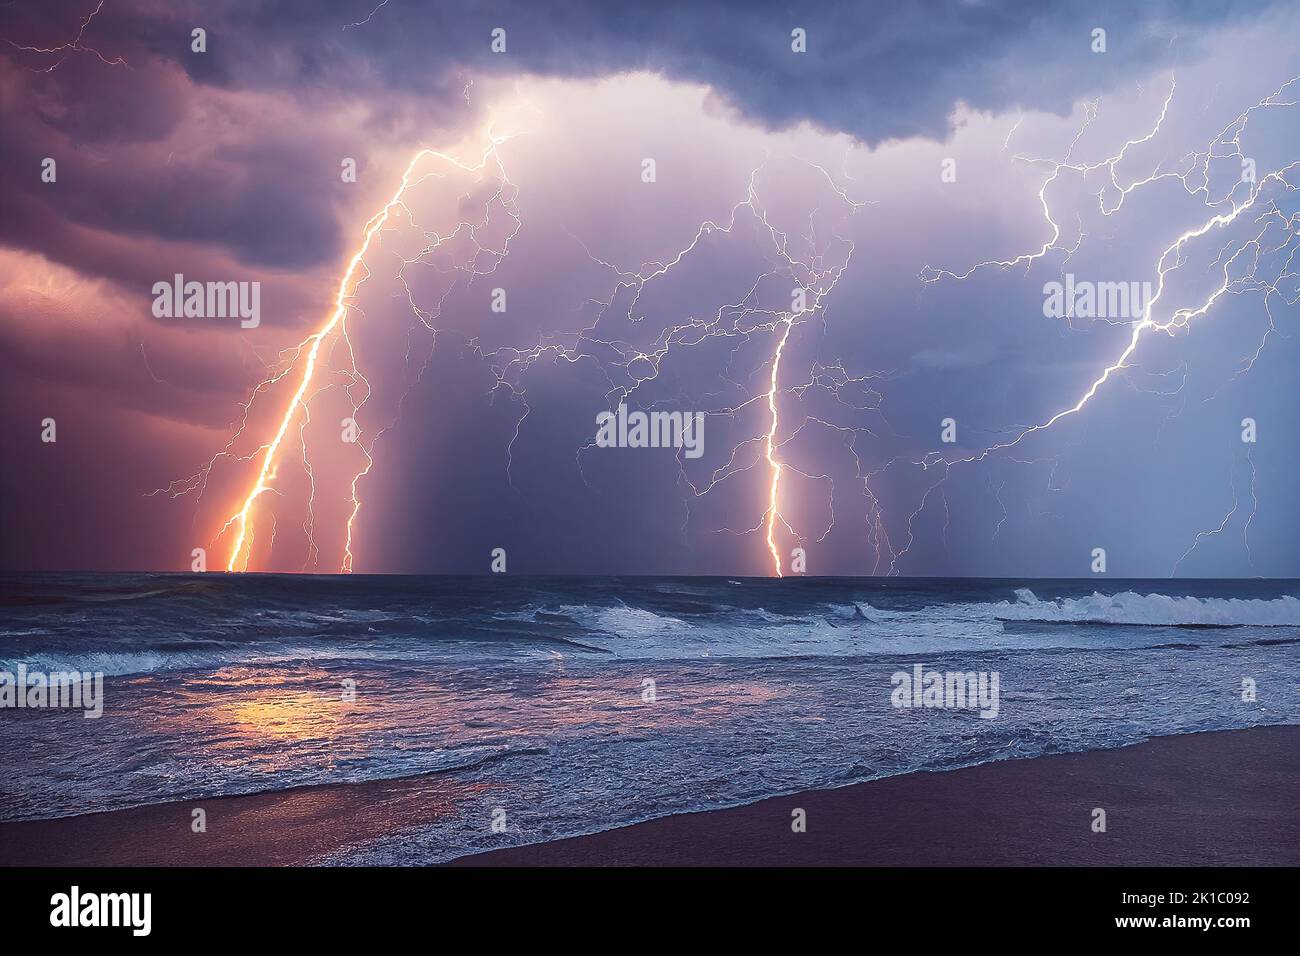 Tropical storm with powerful and dangerous lightning strikes in the cloudy sky and stormy ocean. Natural disasters caused by the climate change. 3D Stock Photo